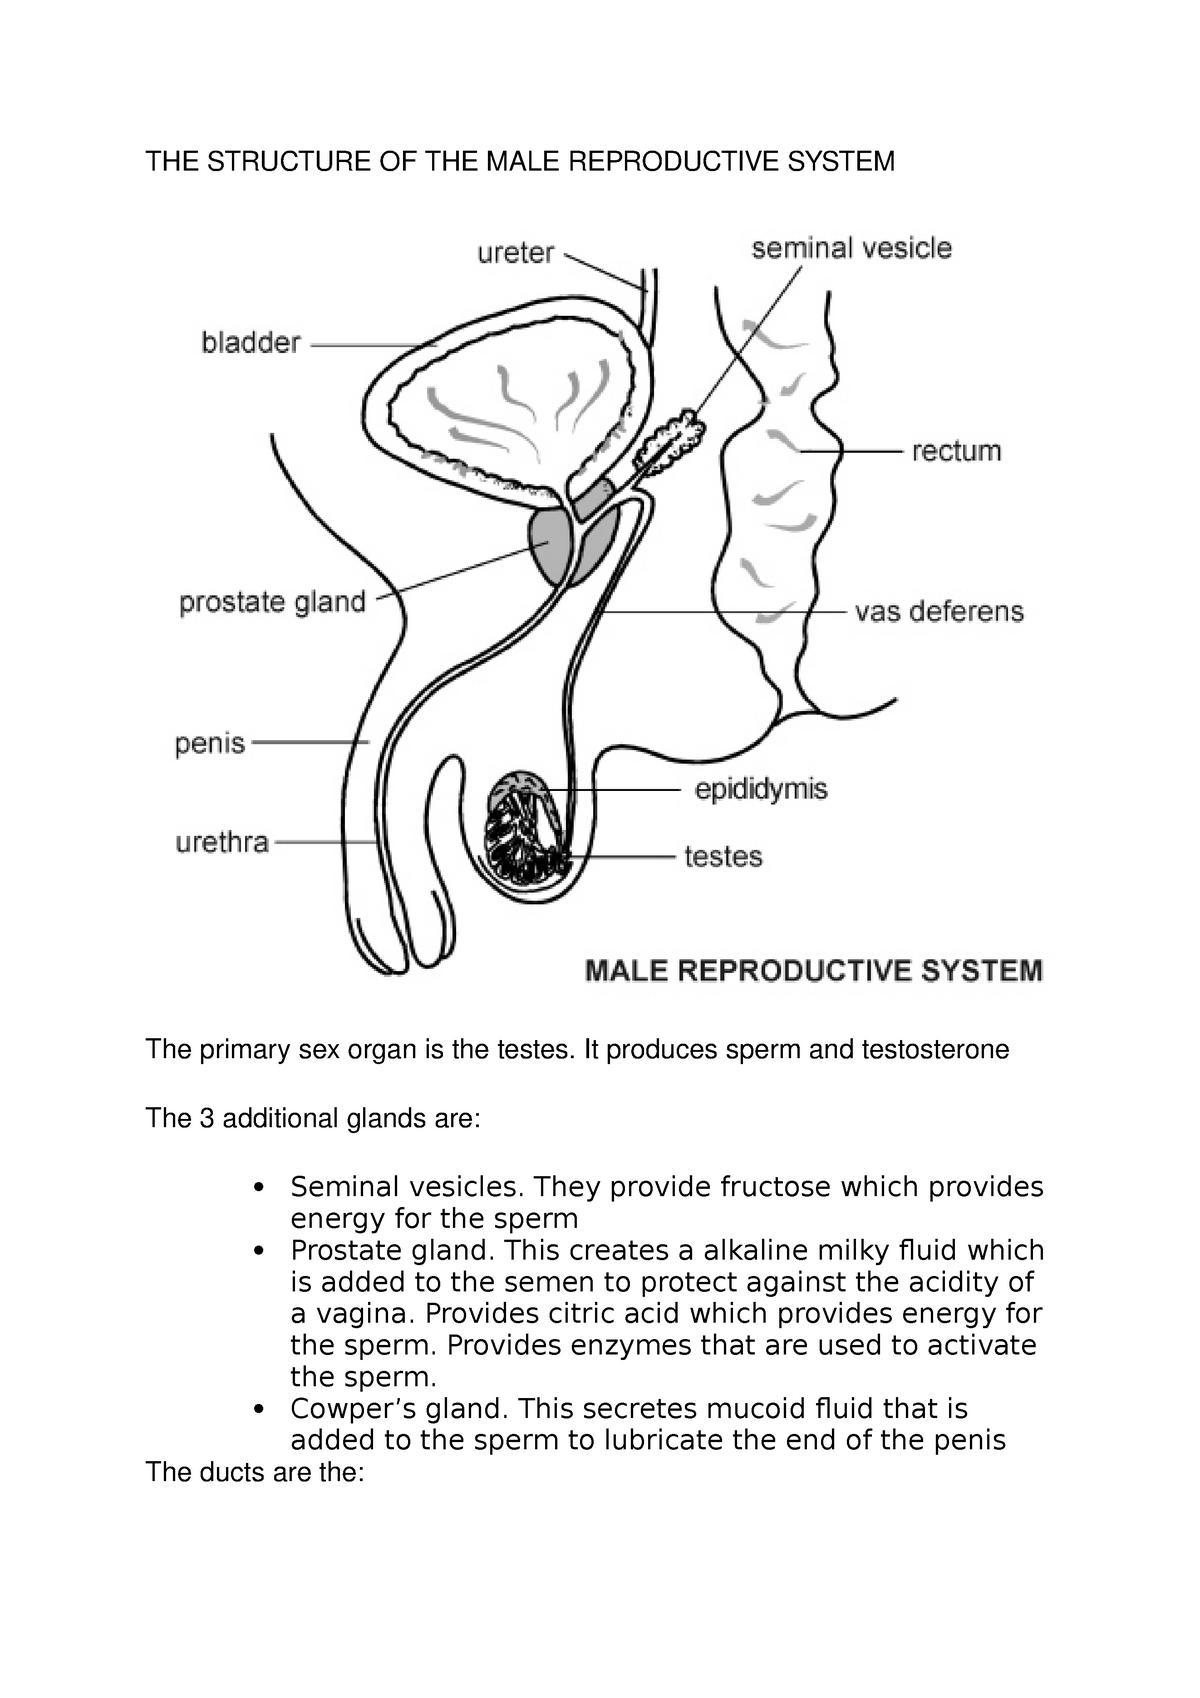 Grade 12 Ieb Life Sciences Notes Reproductive Systems The Structure Of The Male Reproductive 8413